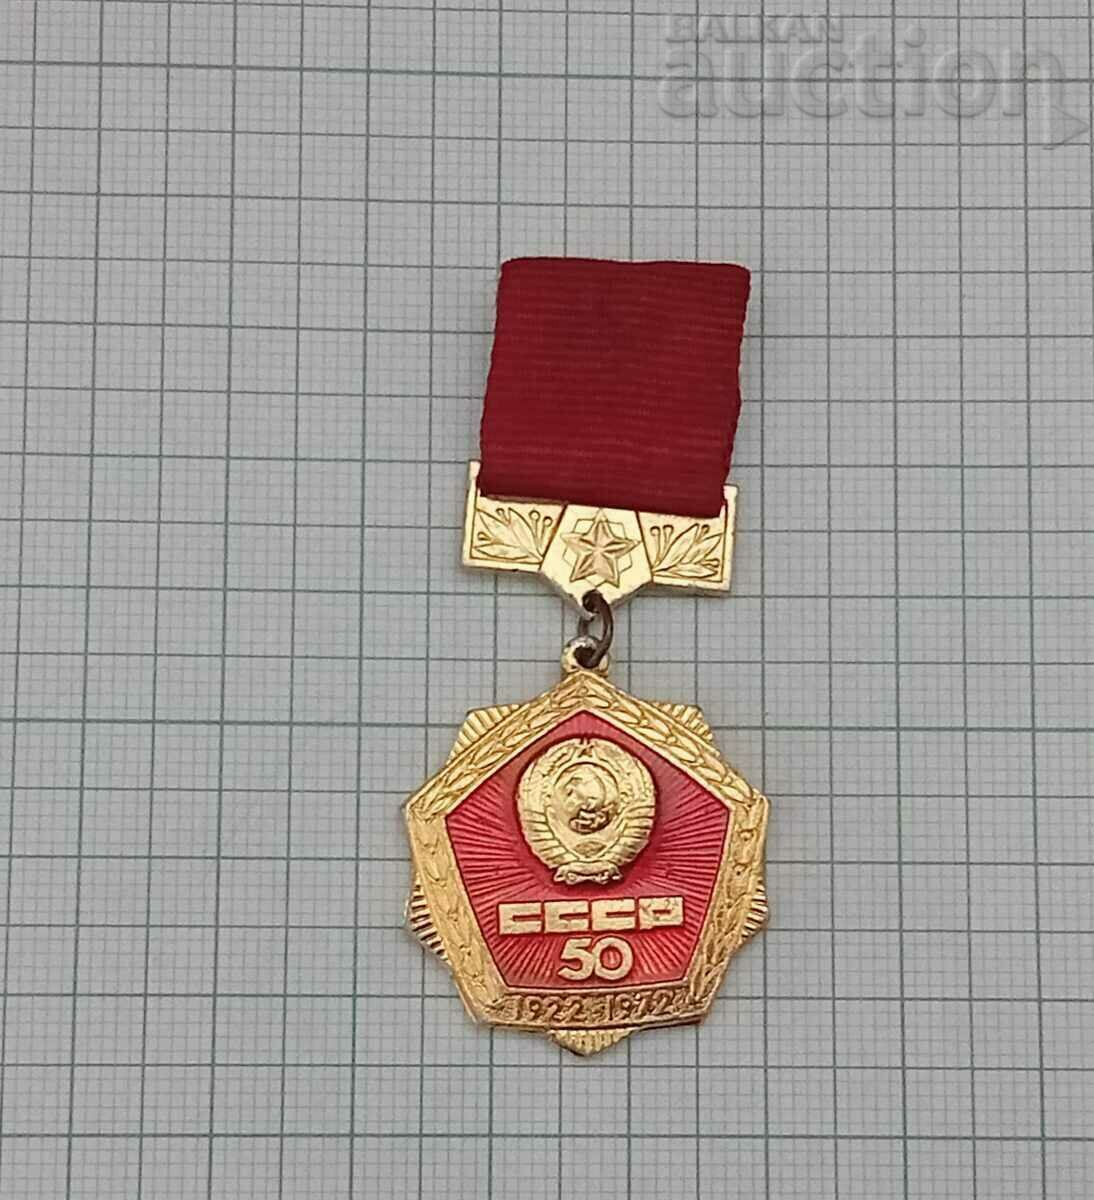 USSR 50 YEARS FROM THE FOUNDATION 1922-1972 MEDAL INSIGNIA